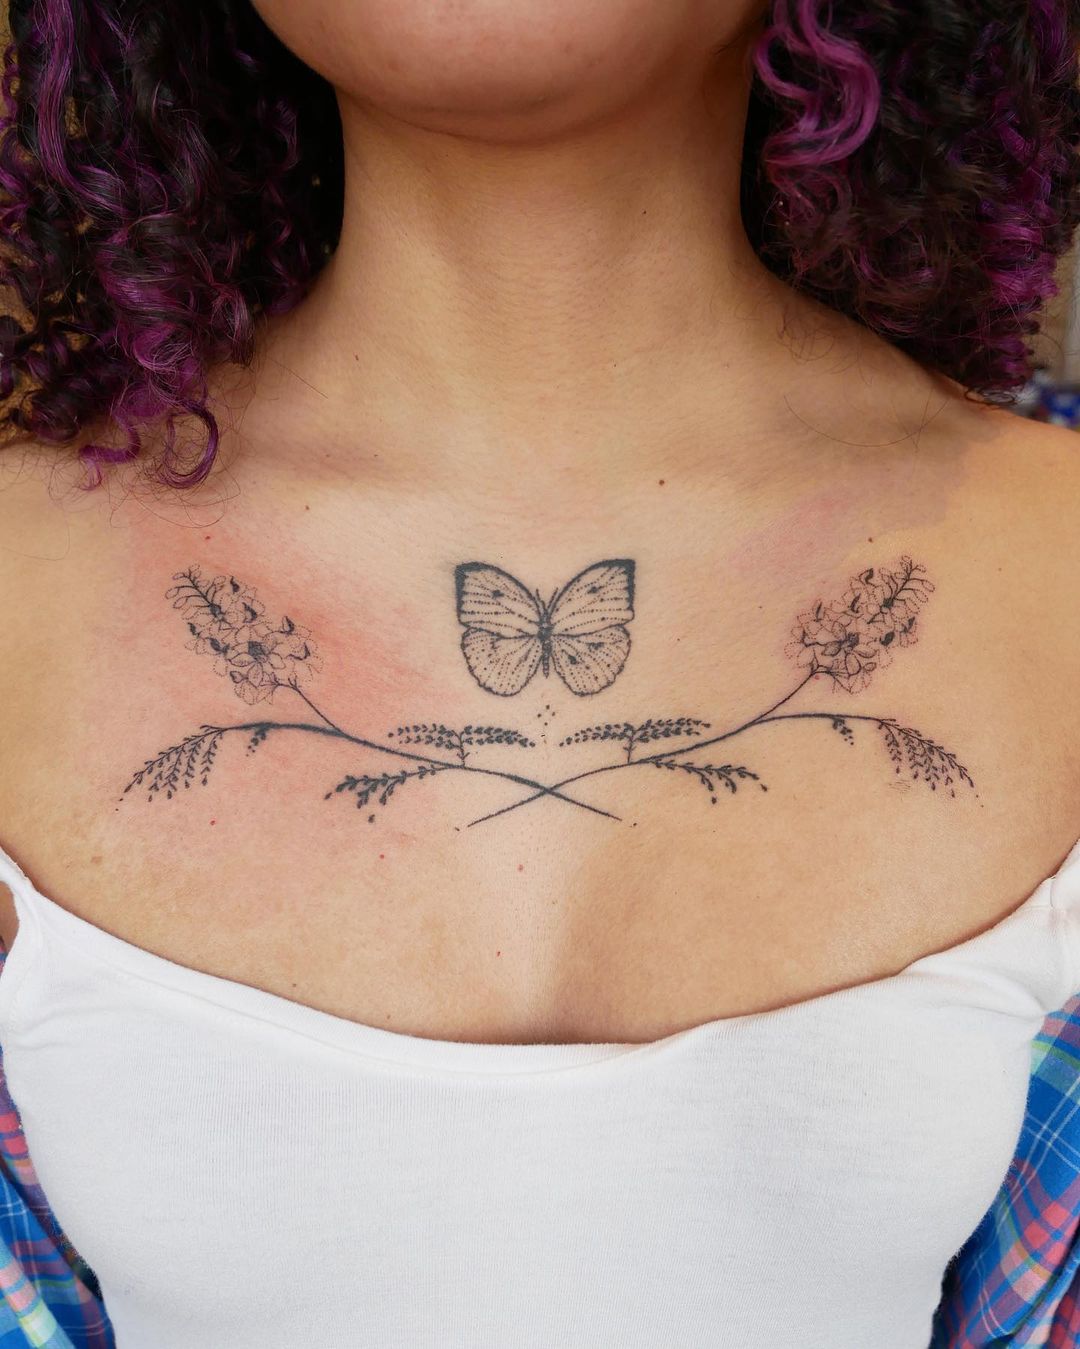 Floral Chest Tattoo